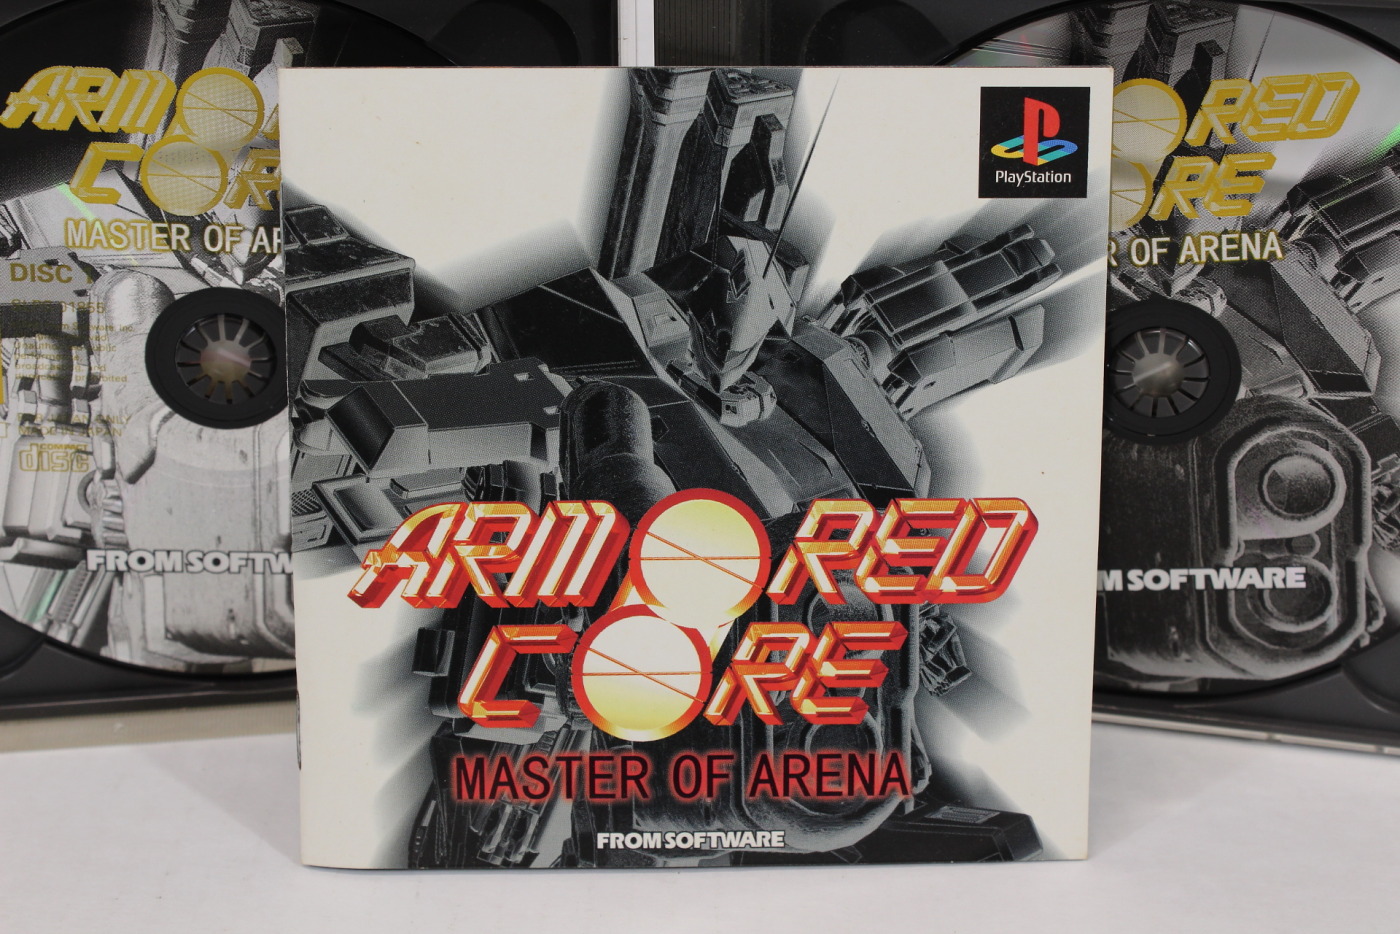 PS1 PS PlayStation 1 Armored Core Master of Arena From Japan